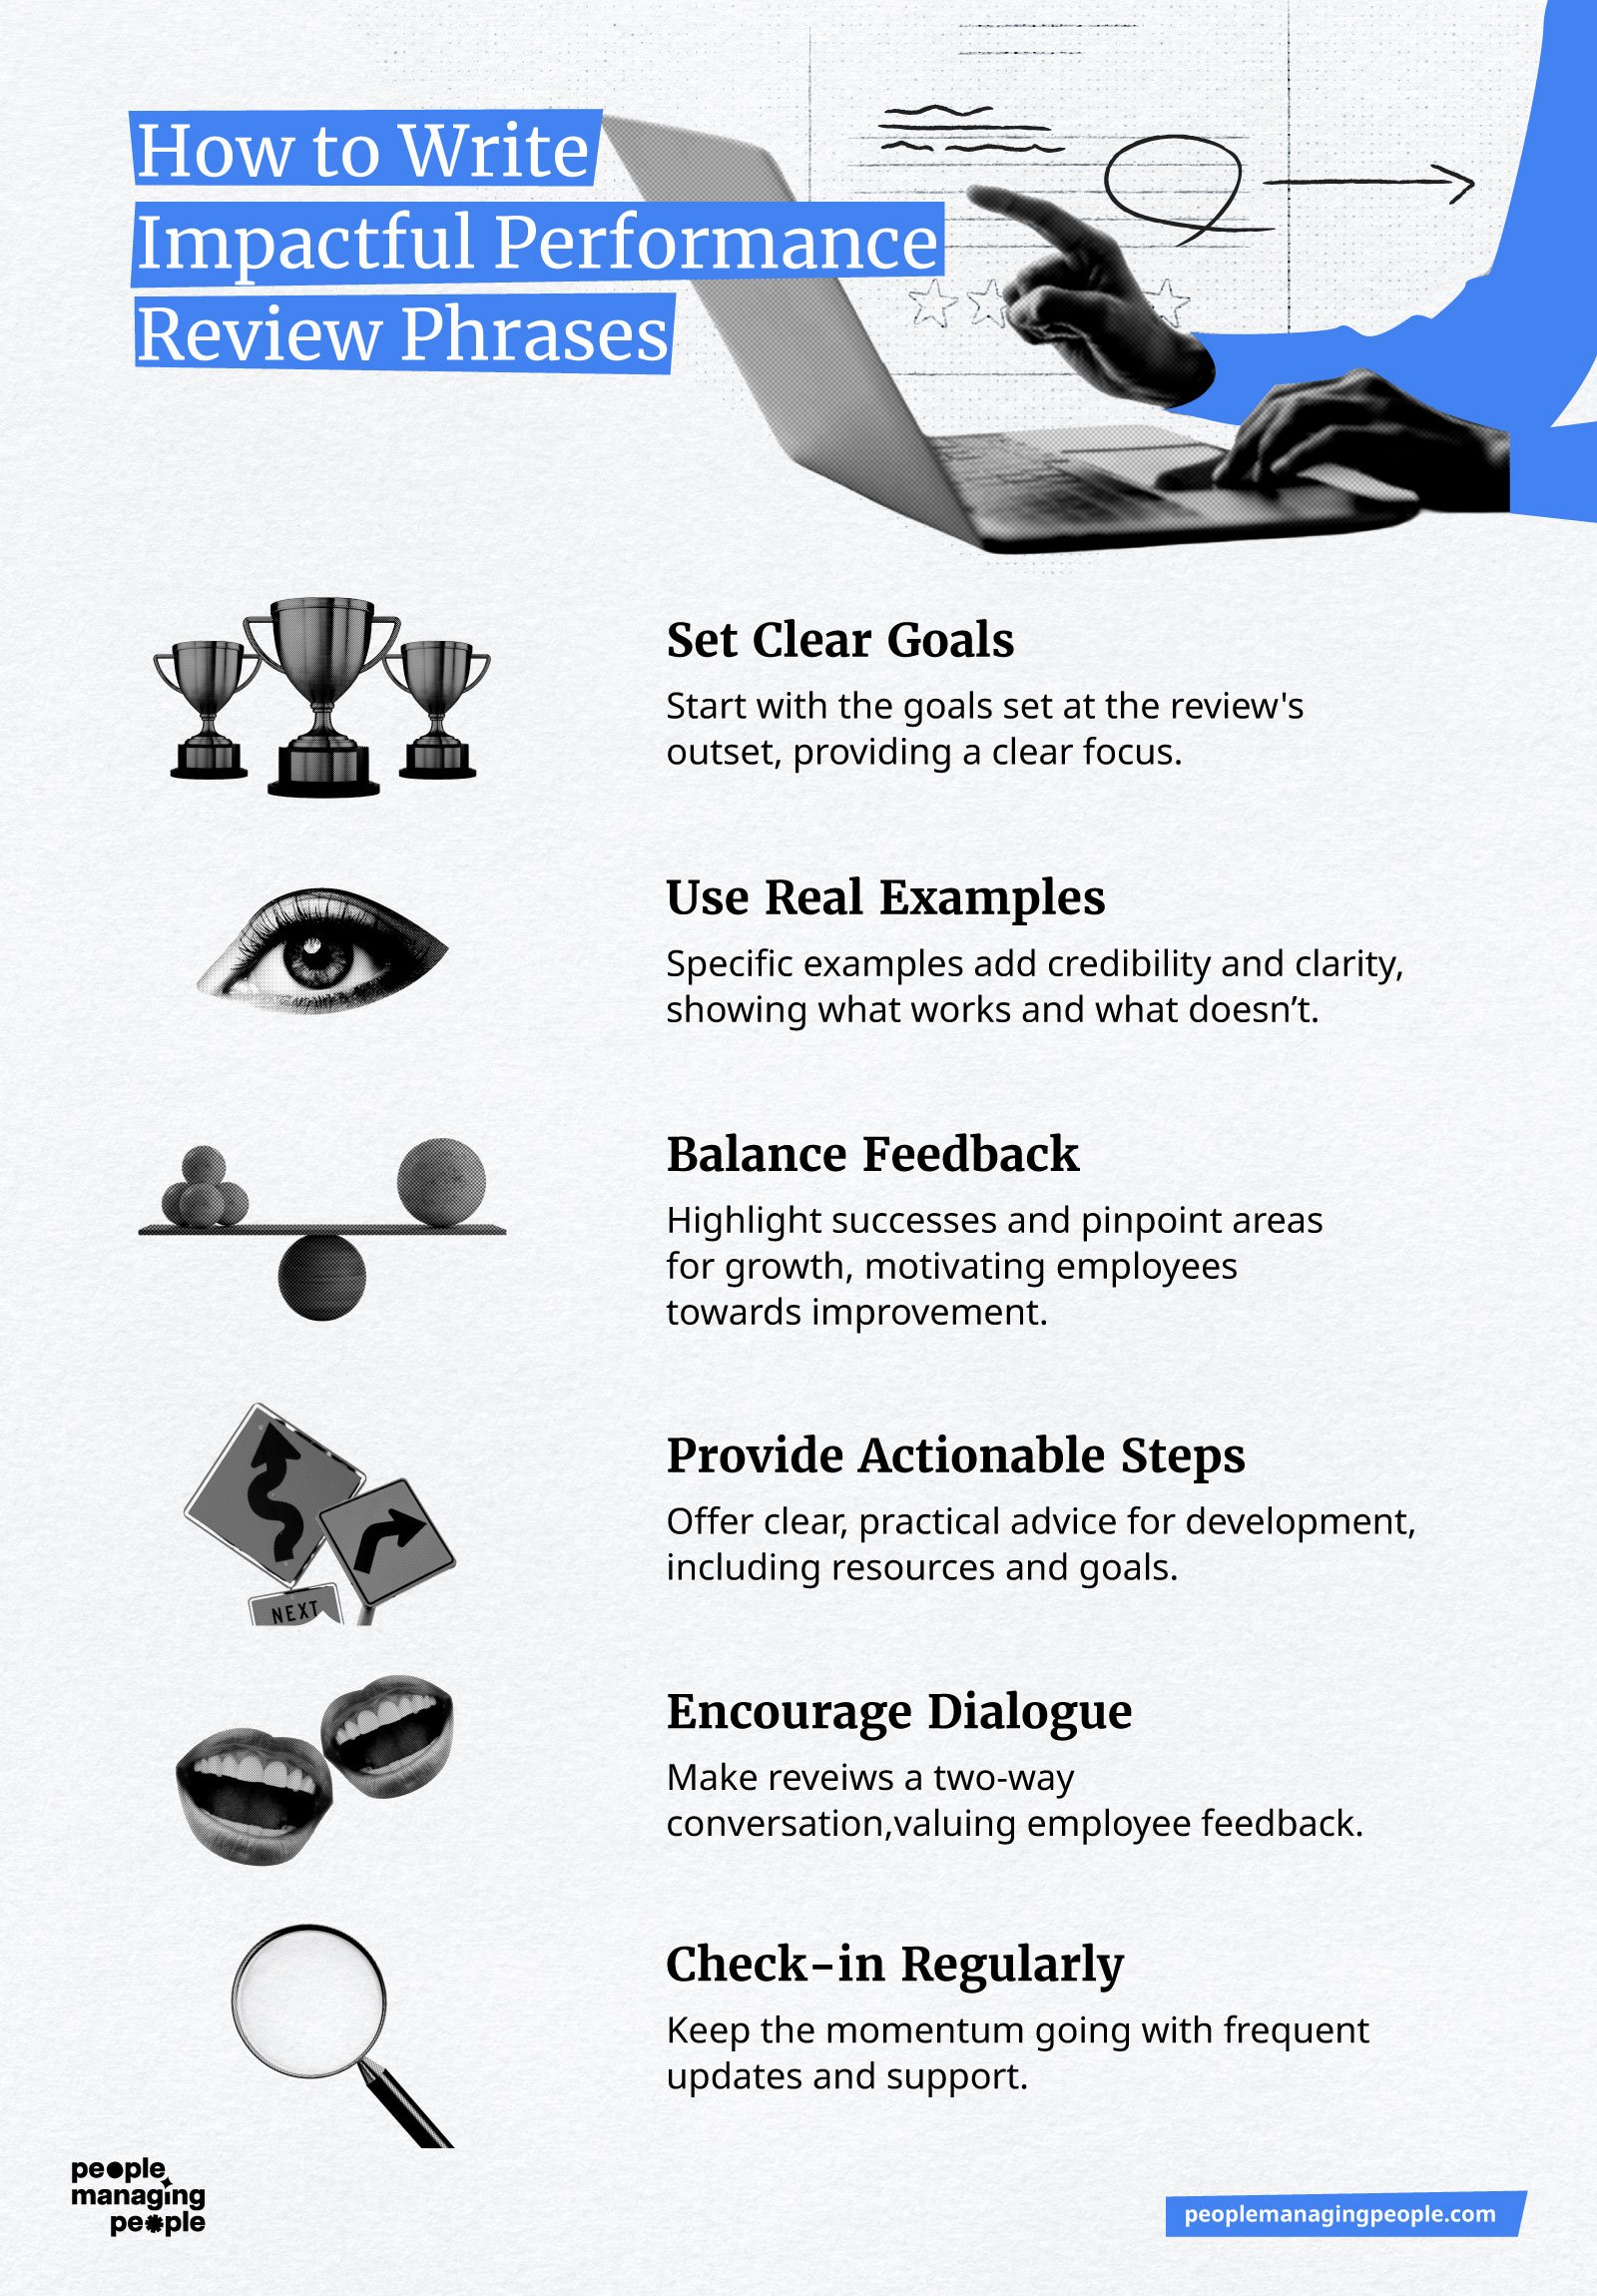 Infographic explaining how to write impactful performance review phrases.